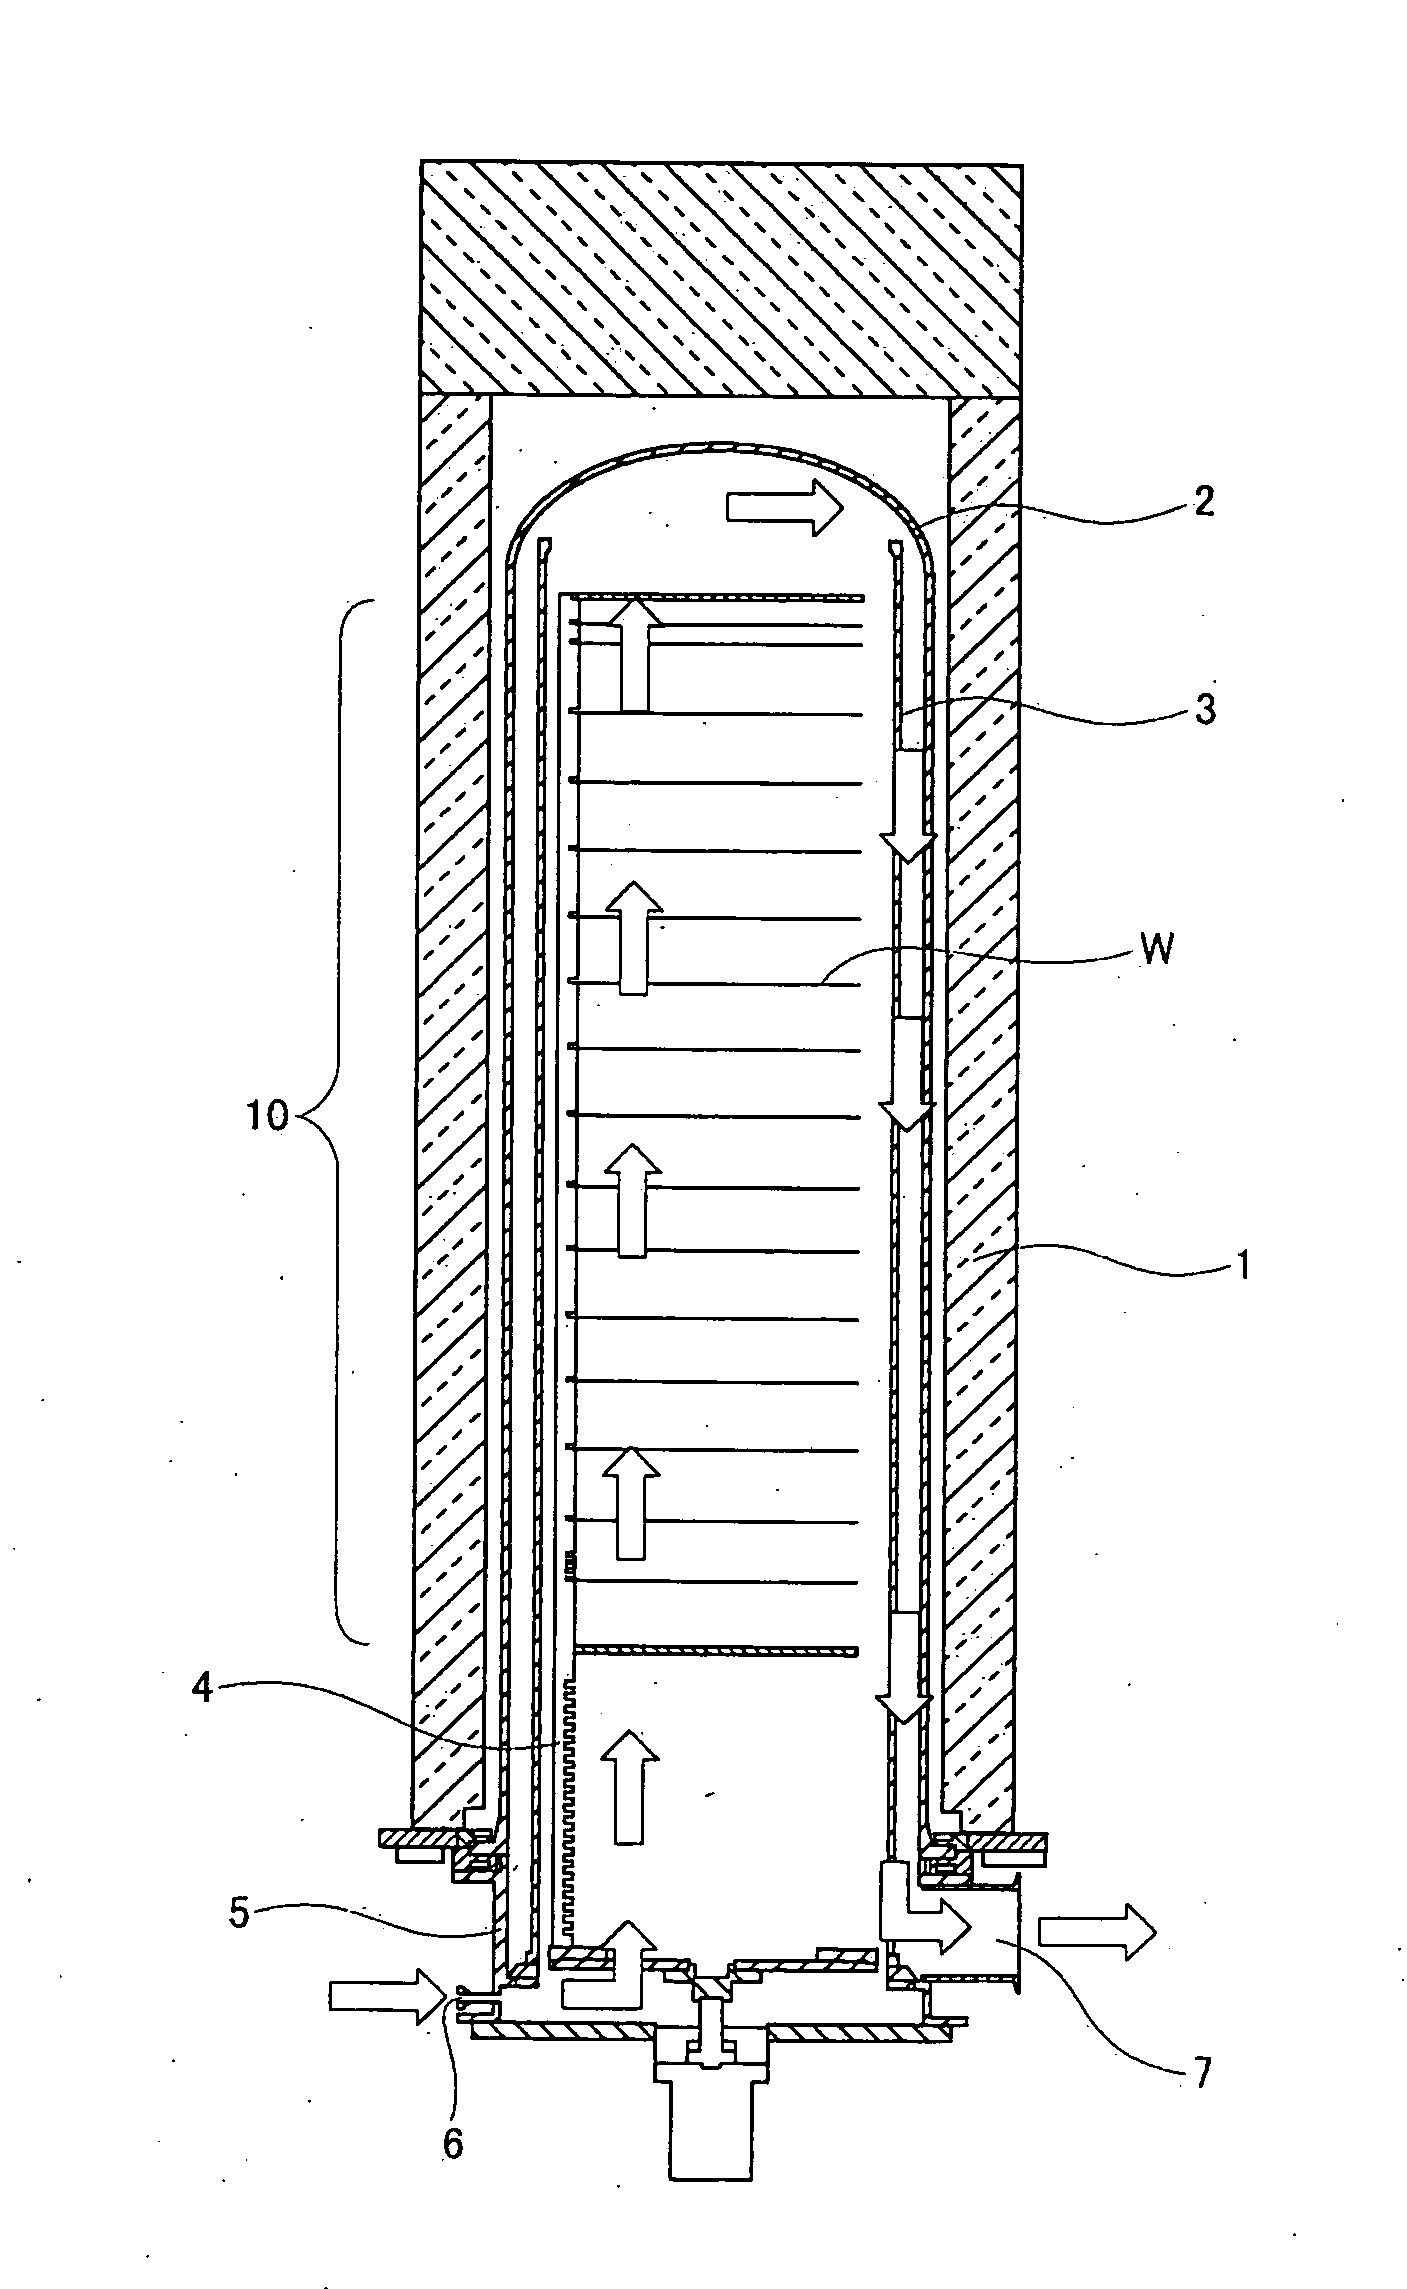 Substrate processing apparatus, method of manufacturing semiconductor device, and reaction vessel